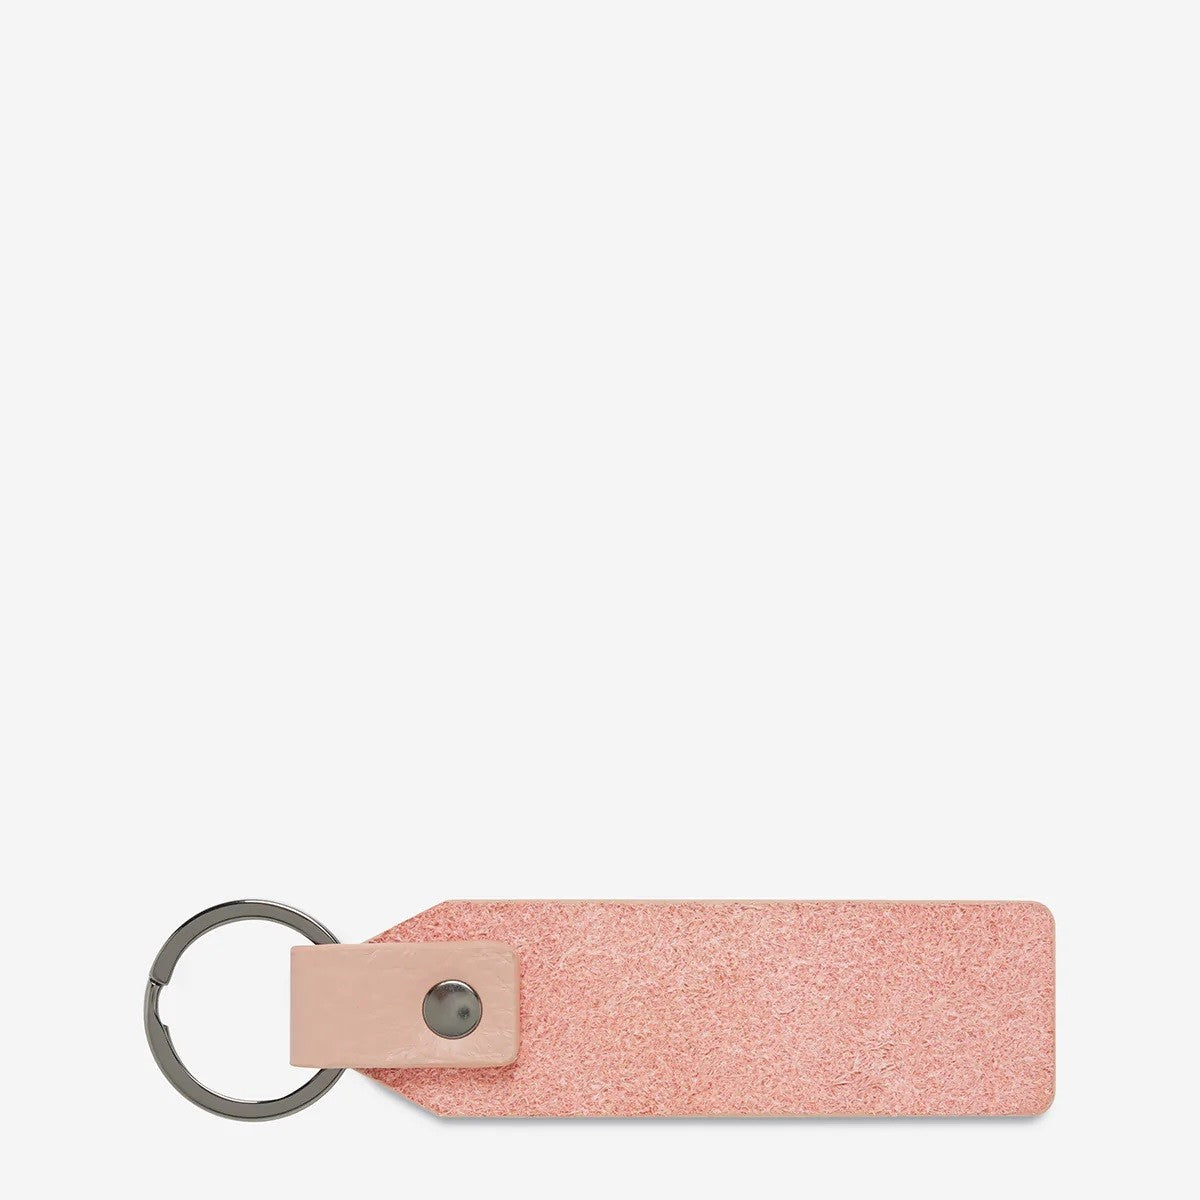 Status Anxiety Make Your Move Key Tag [COLOUR:Pink]